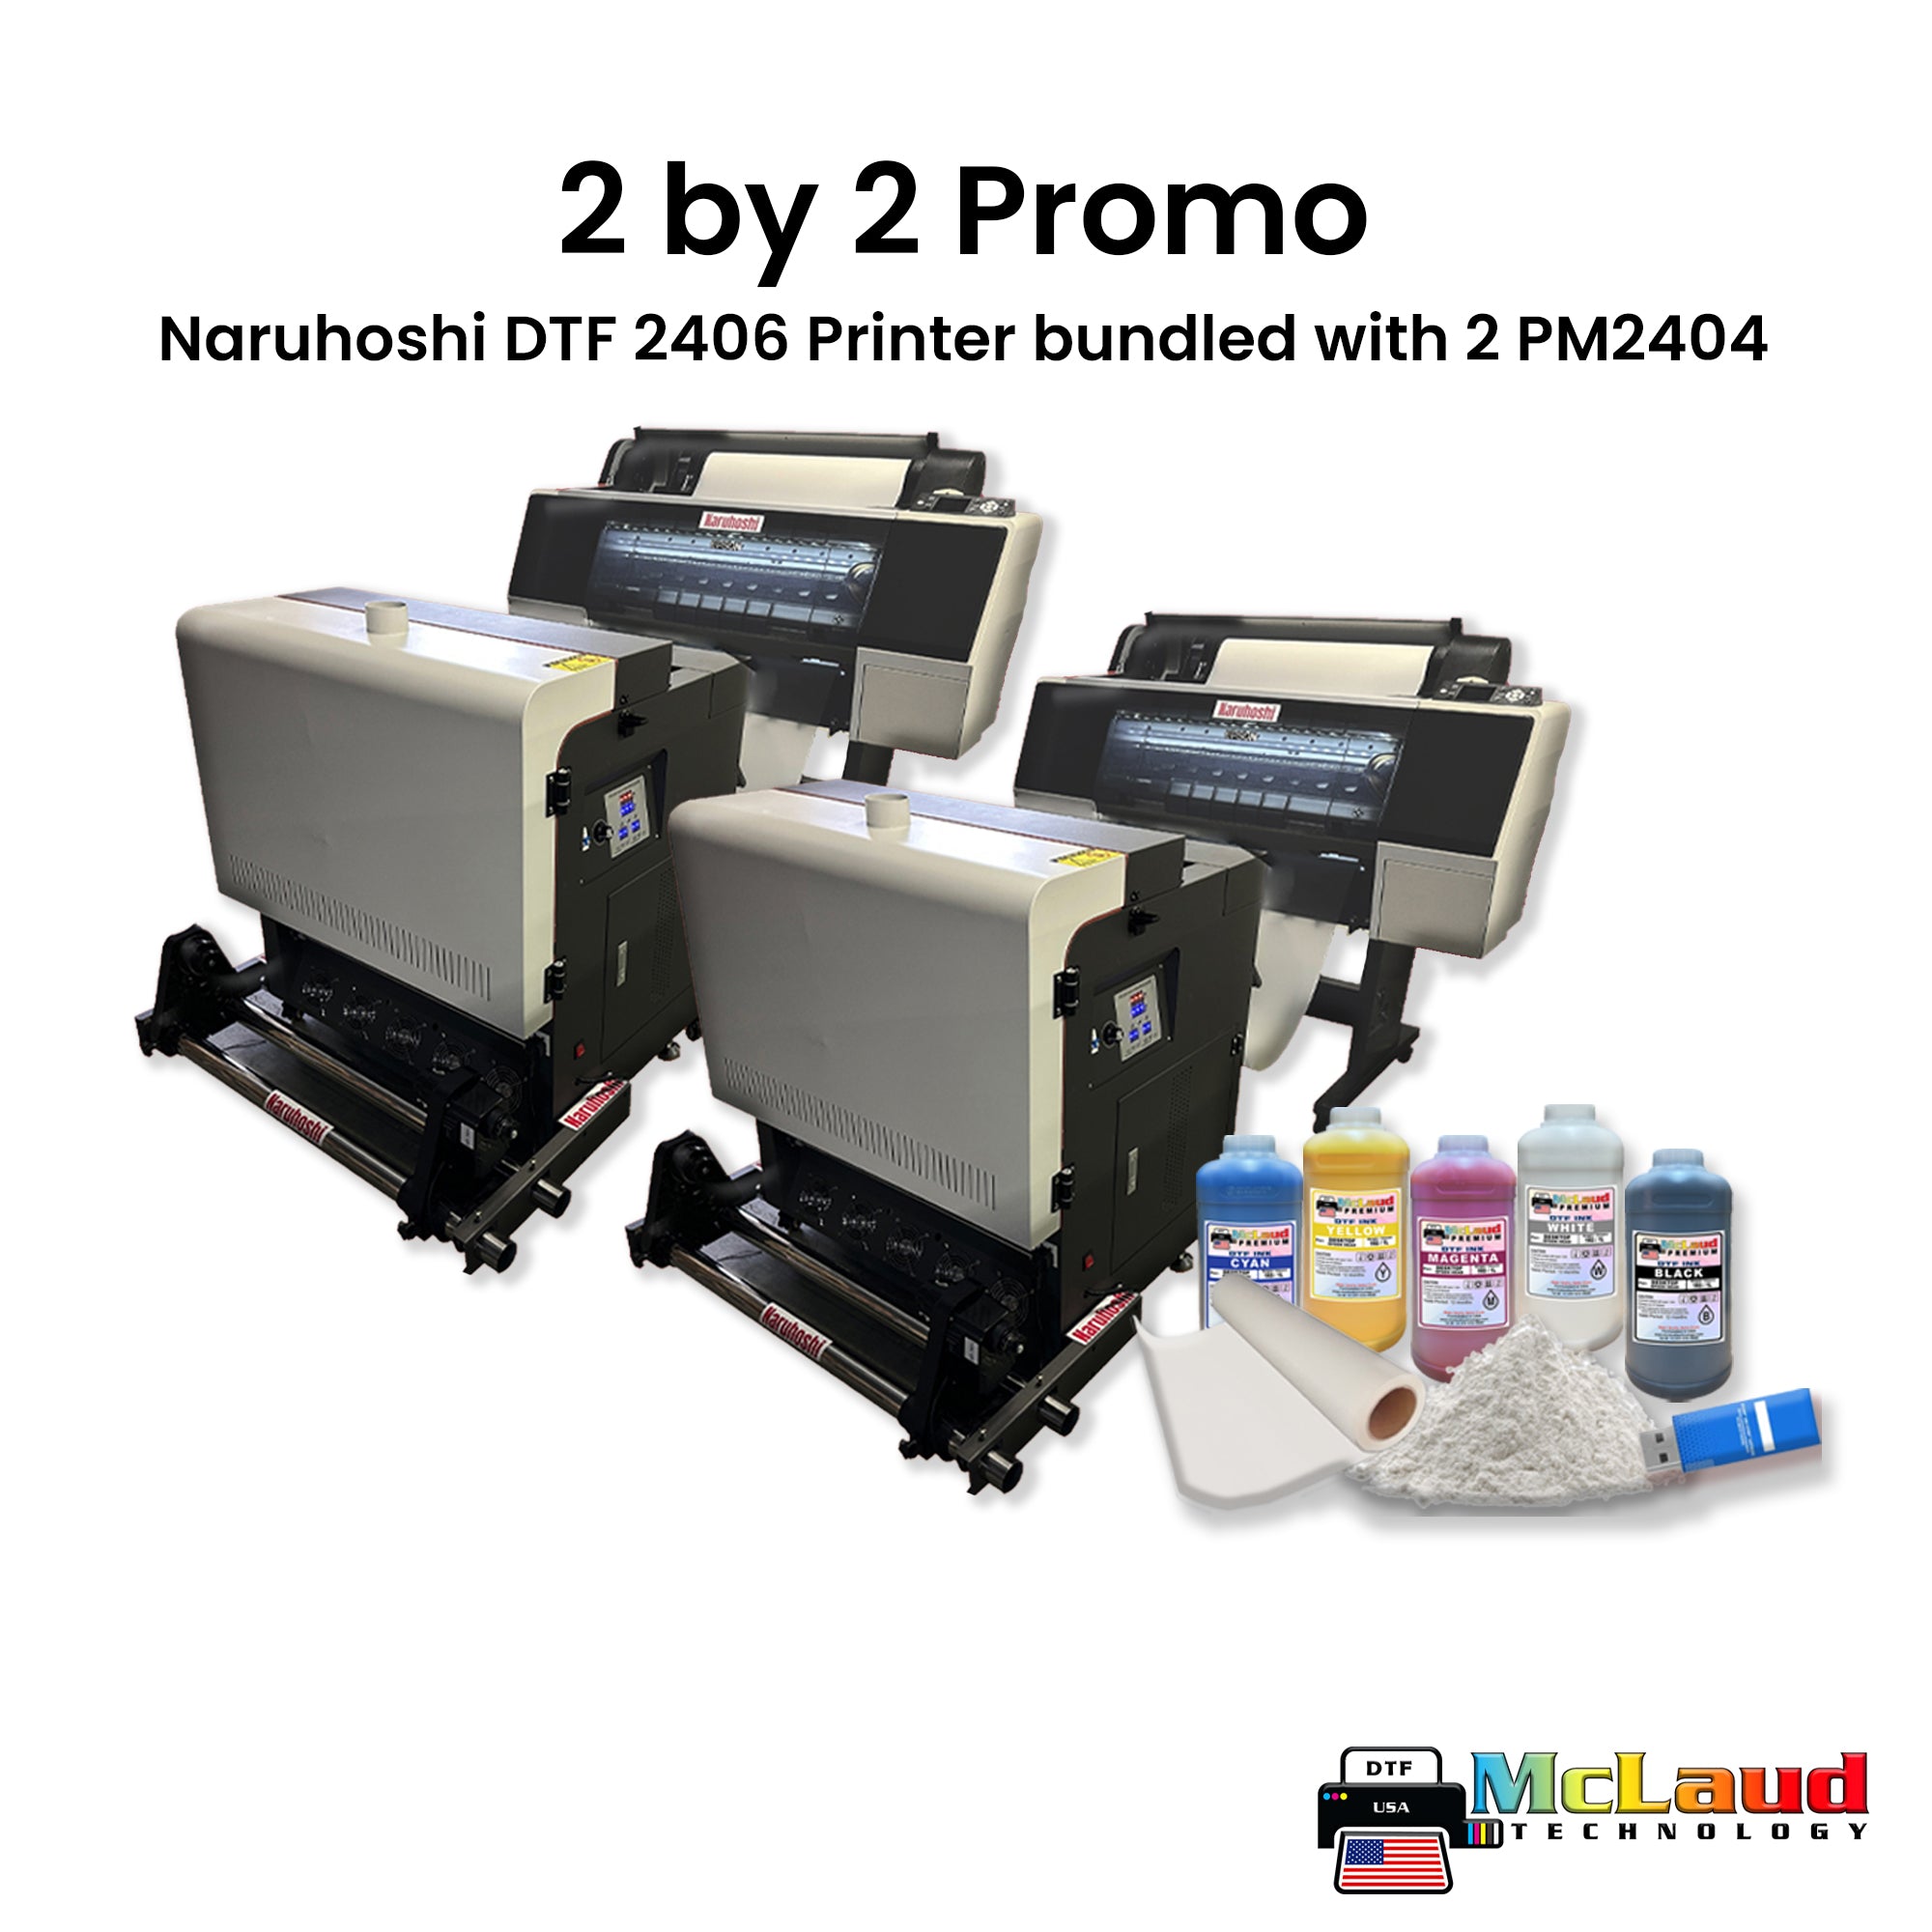 2 by 2 Promo: 2 Naruhoshi DTF 2406 Printer bundled with 2 PM2404 – McLaud  Technology